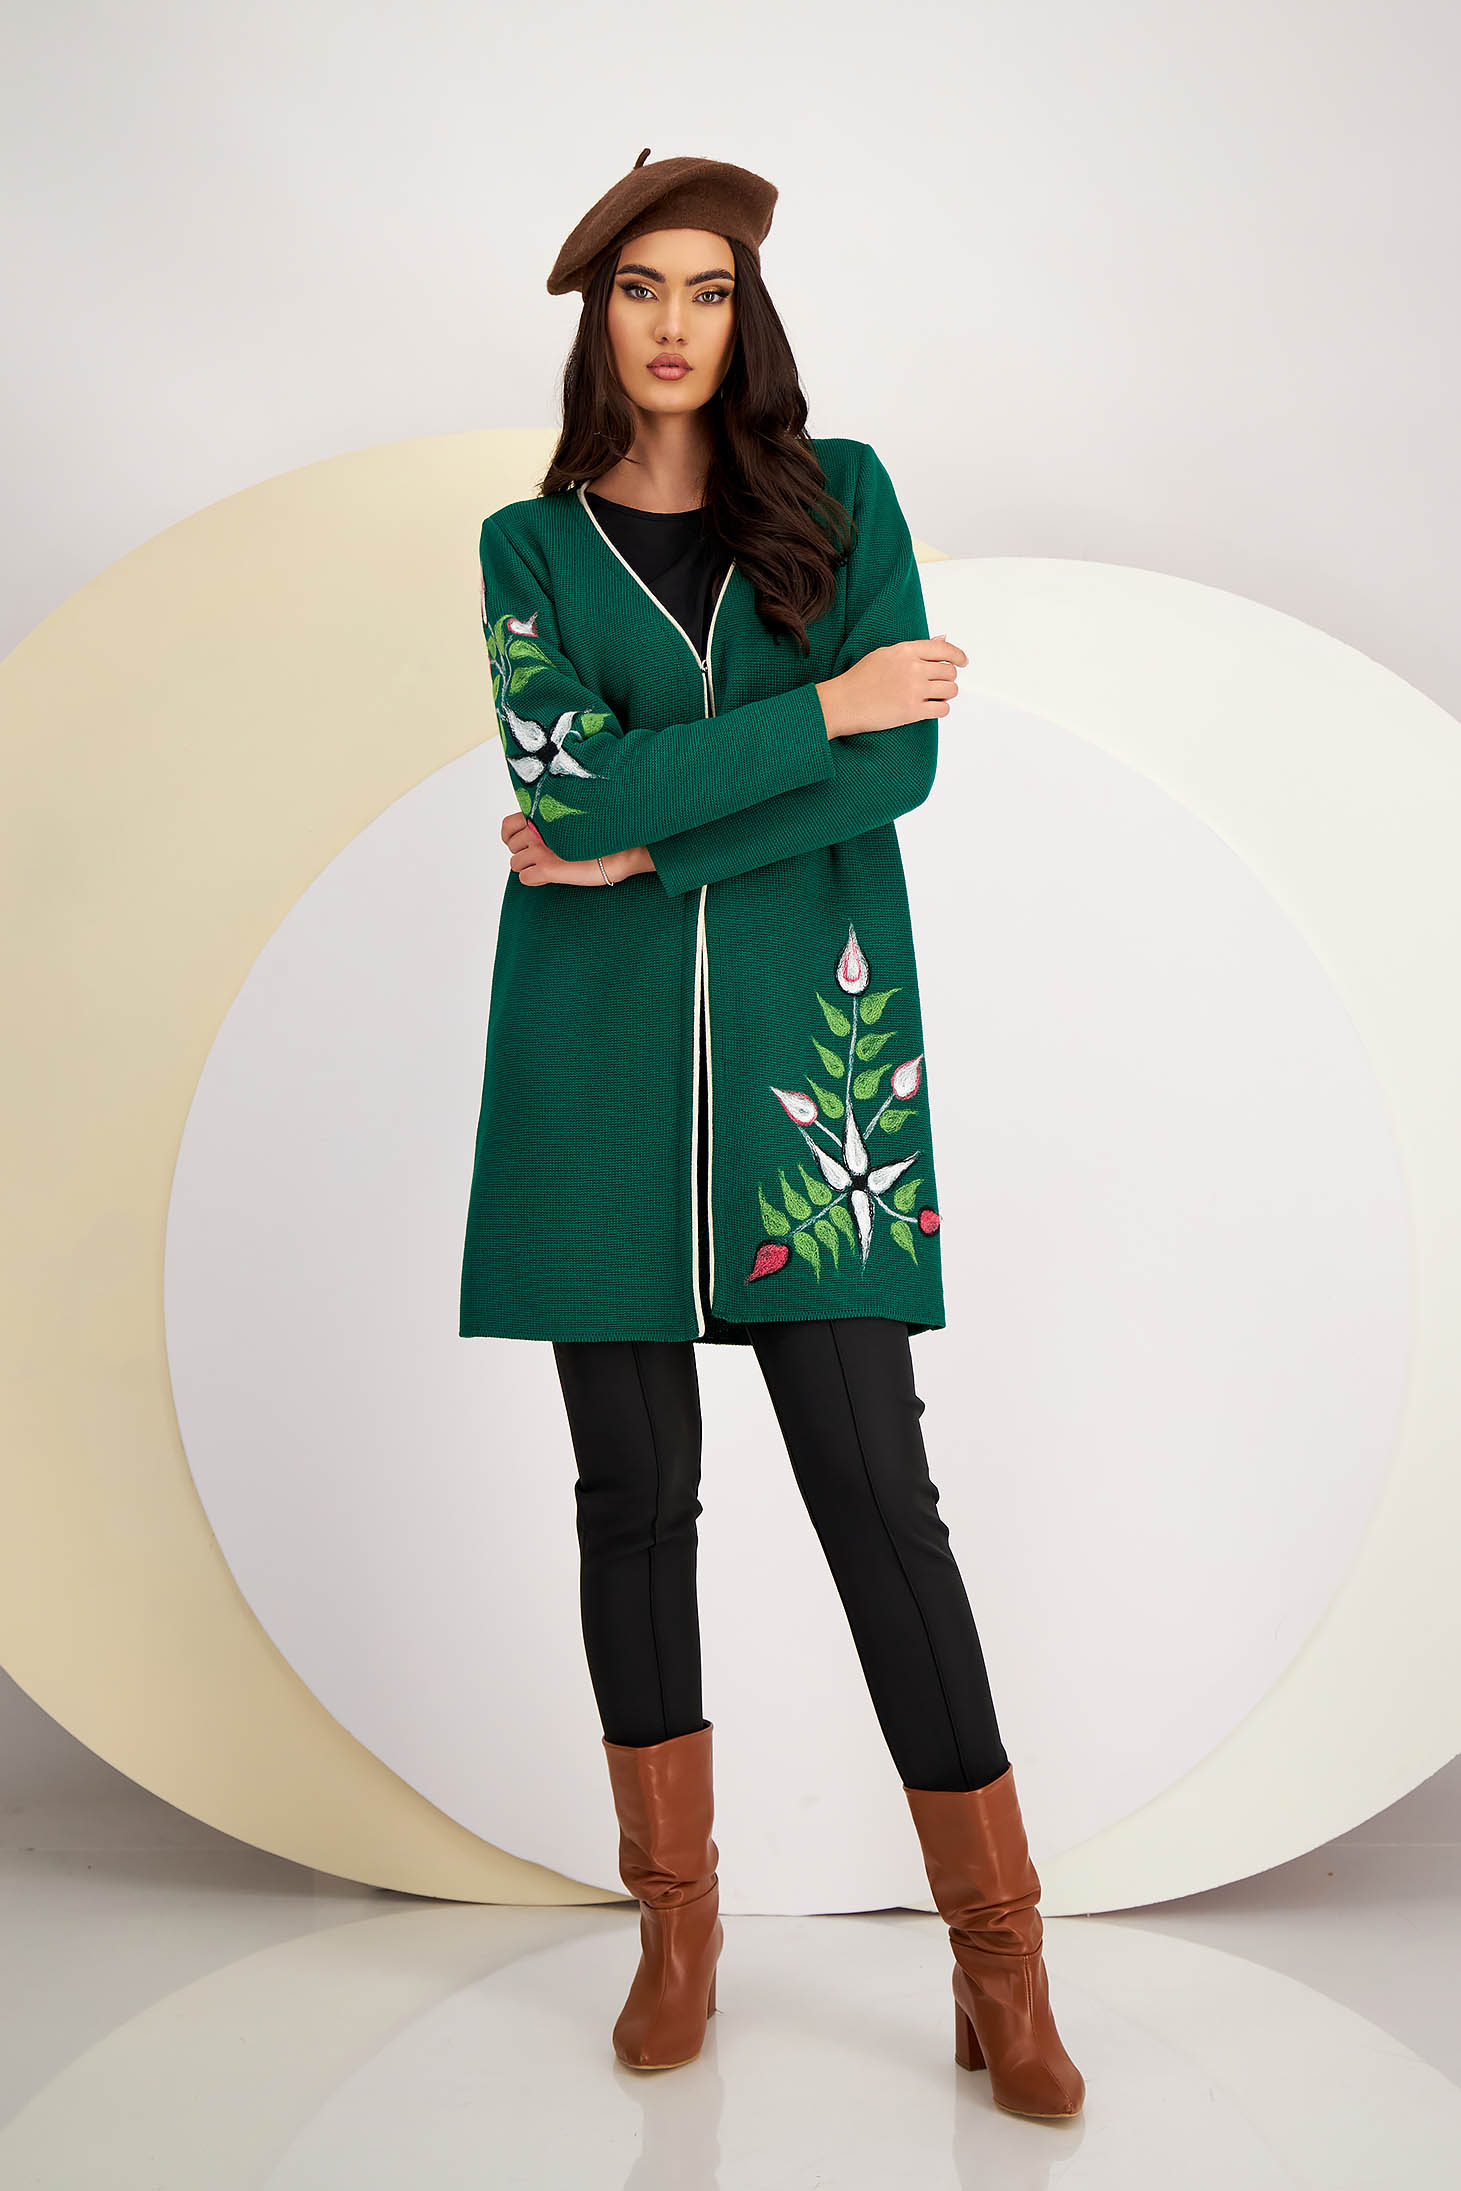 Green knitted cardigan with front closure and floral patterns - Lady Pandora 3 - StarShinerS.com